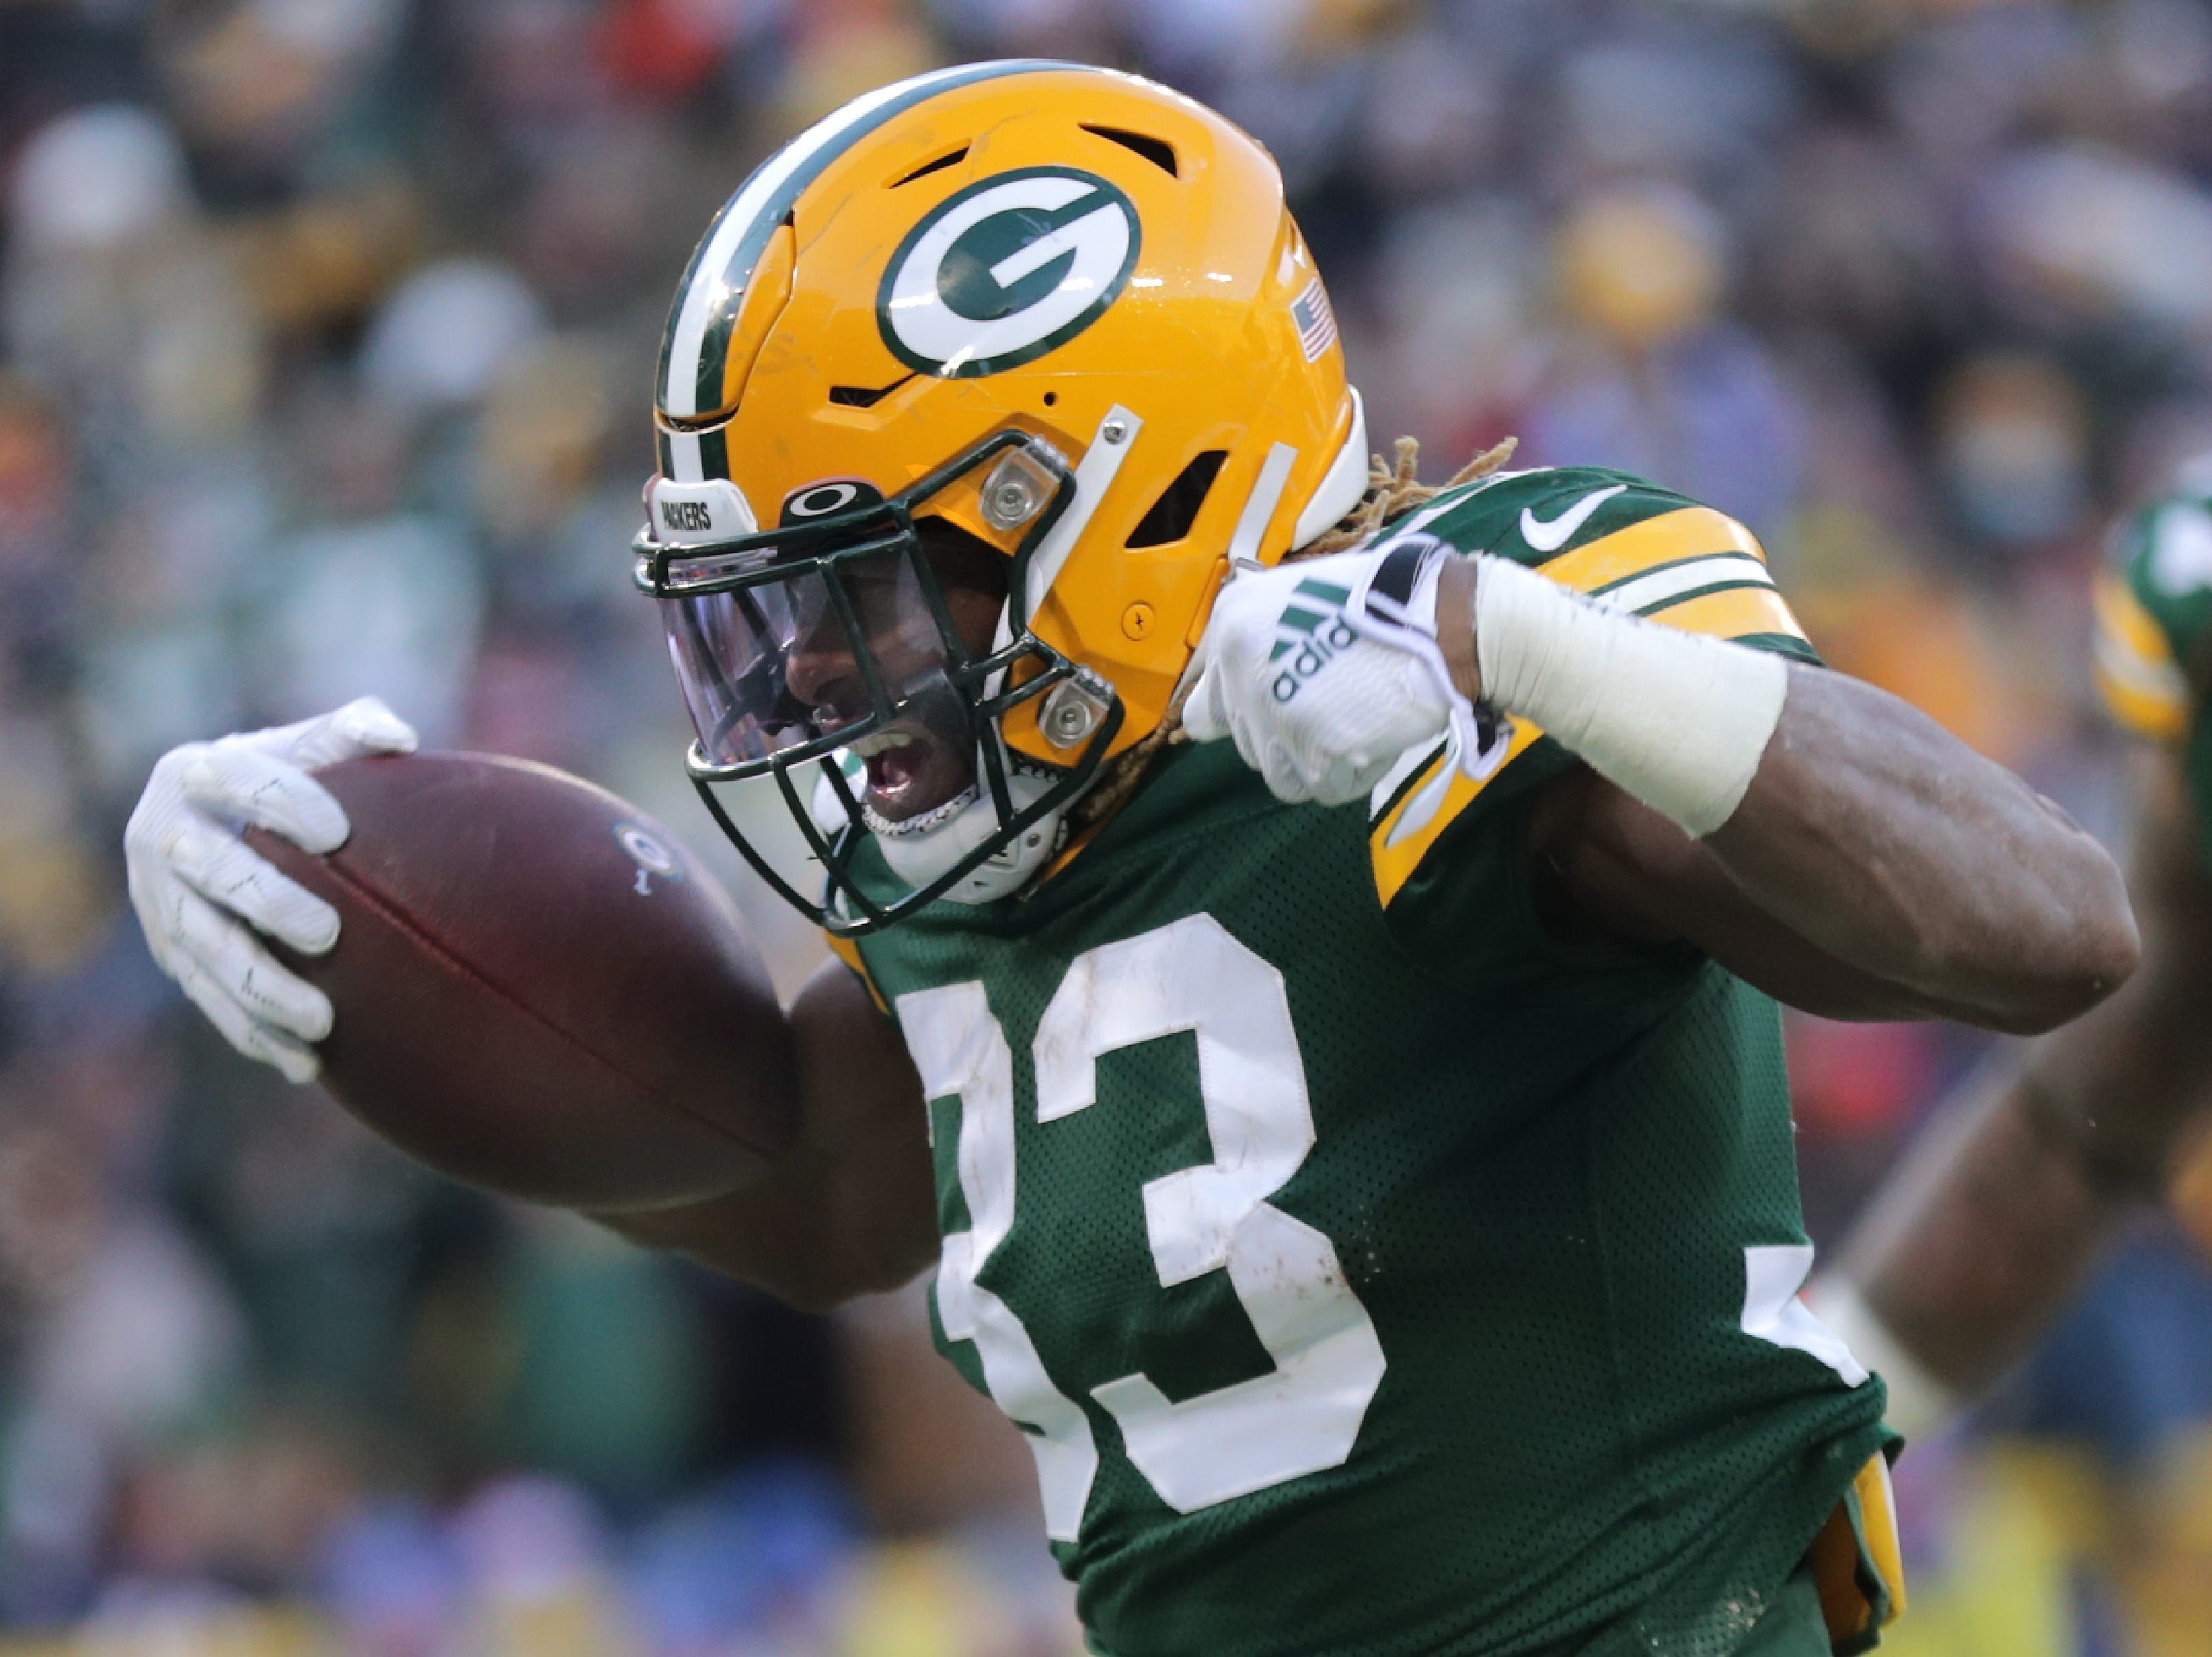 Green Bay Packers running back Aaron Jones (33) reacts after rushing for a third quarter touchdown against the Chicago Bears during their football game on Sunday, December 15, 2019, at Lambeau Field in Green Bay, Wis.